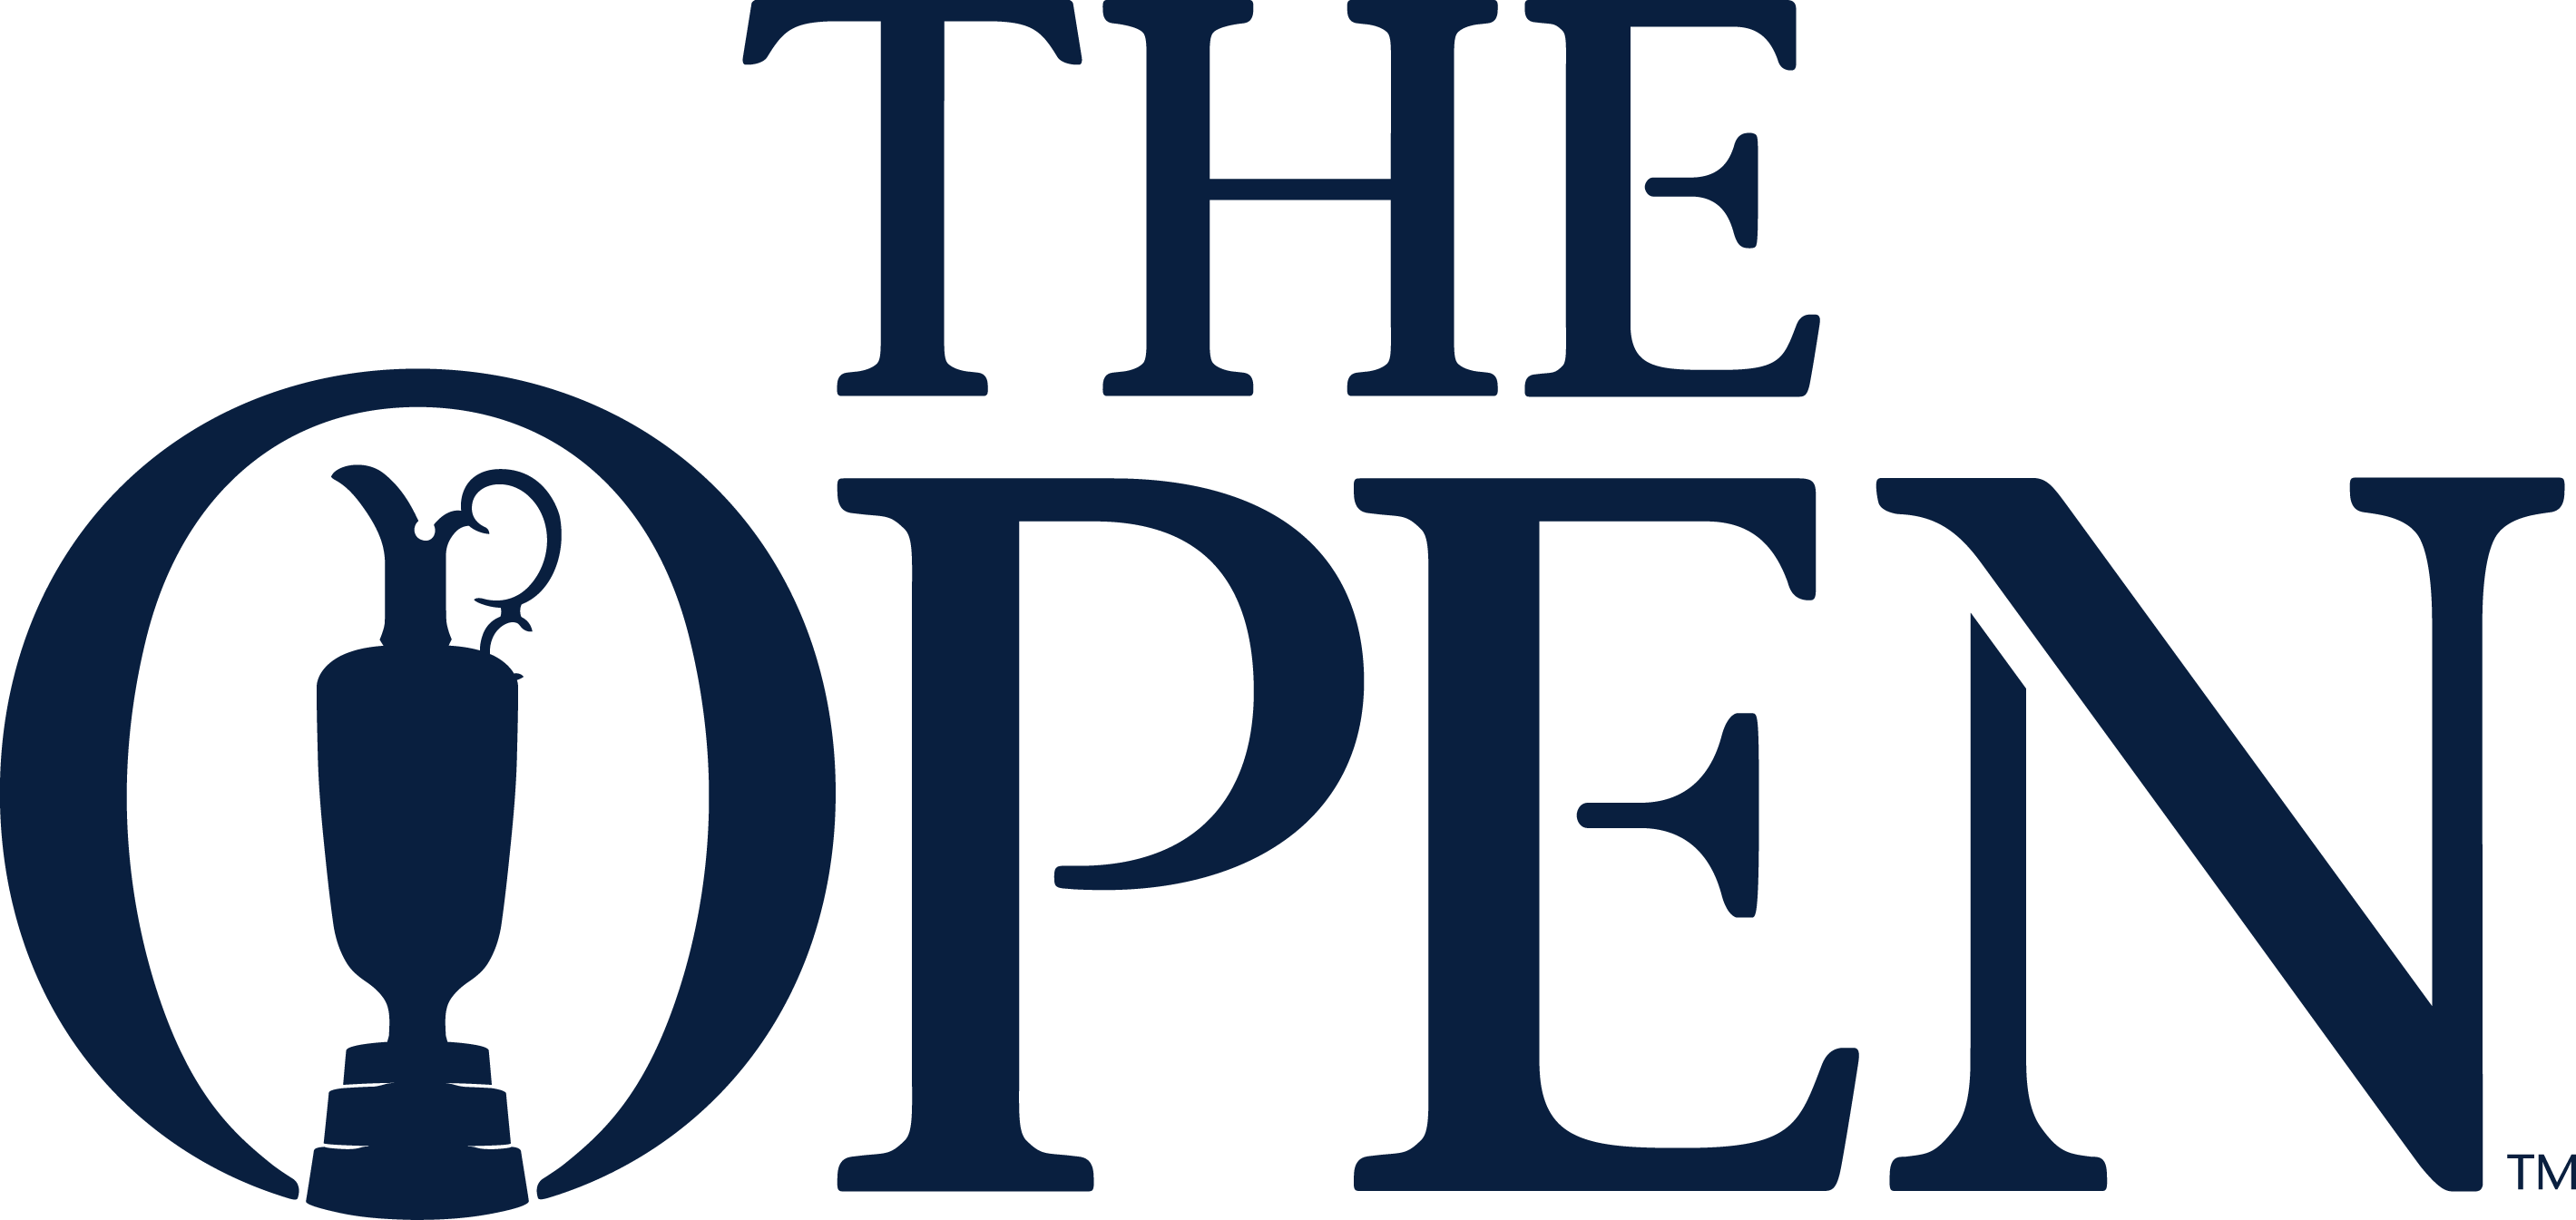 The Open Championship, is one of the most prestigious and historic events in the world of golf.